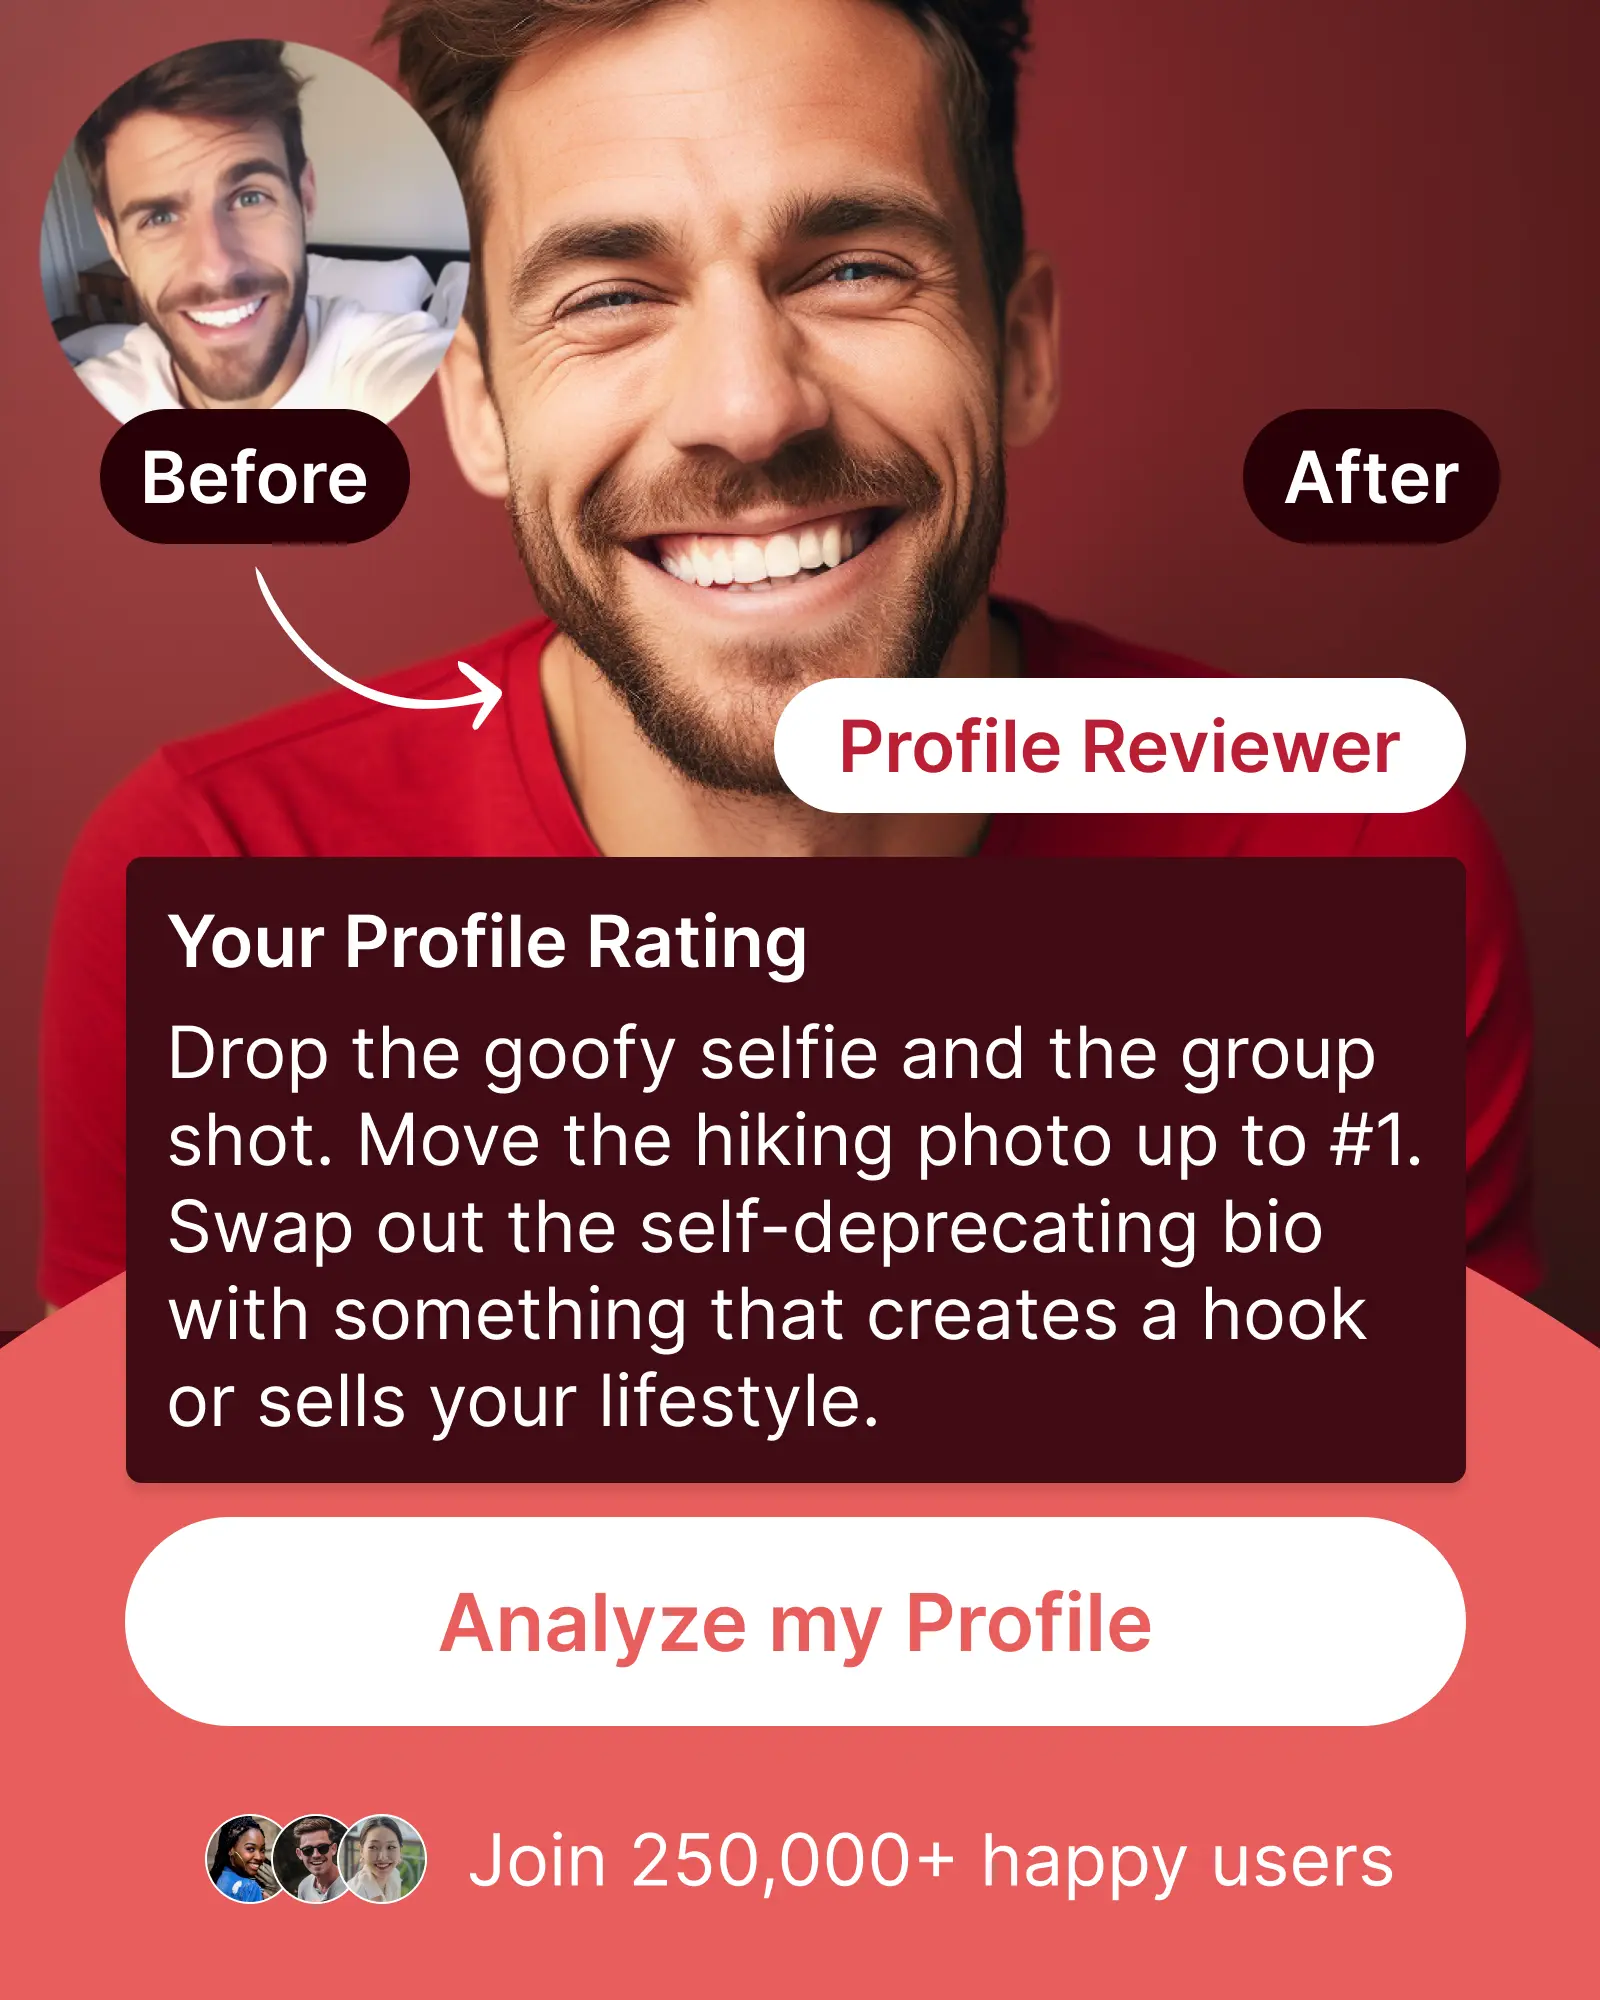 Tinder profile review to get more matches